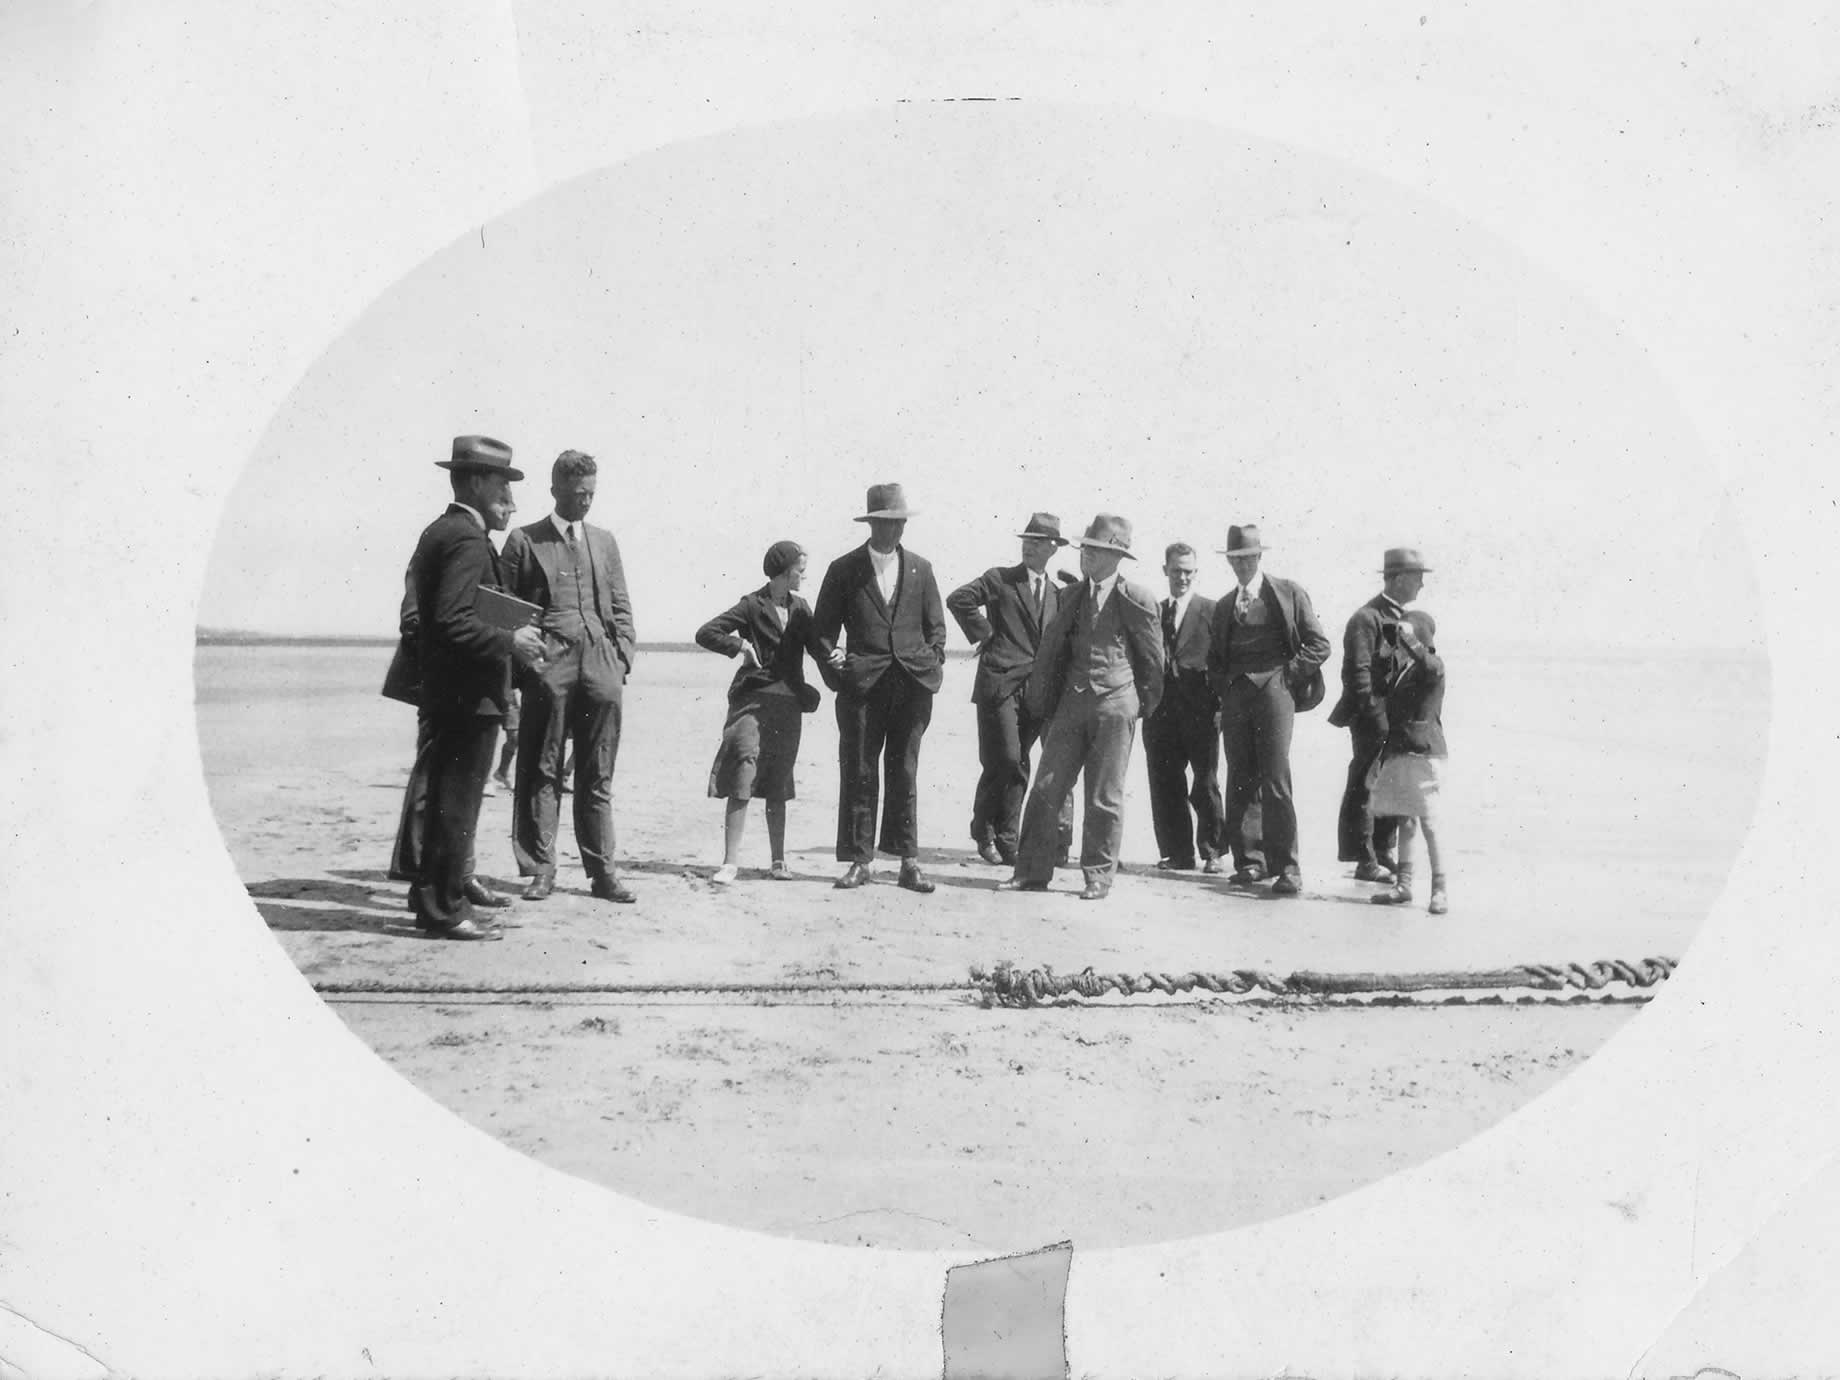 Onlookers viewing the original cable which came from Apollo Bay in Victoria to Stanley via King Island in 1936, with a young Meg in the crowd